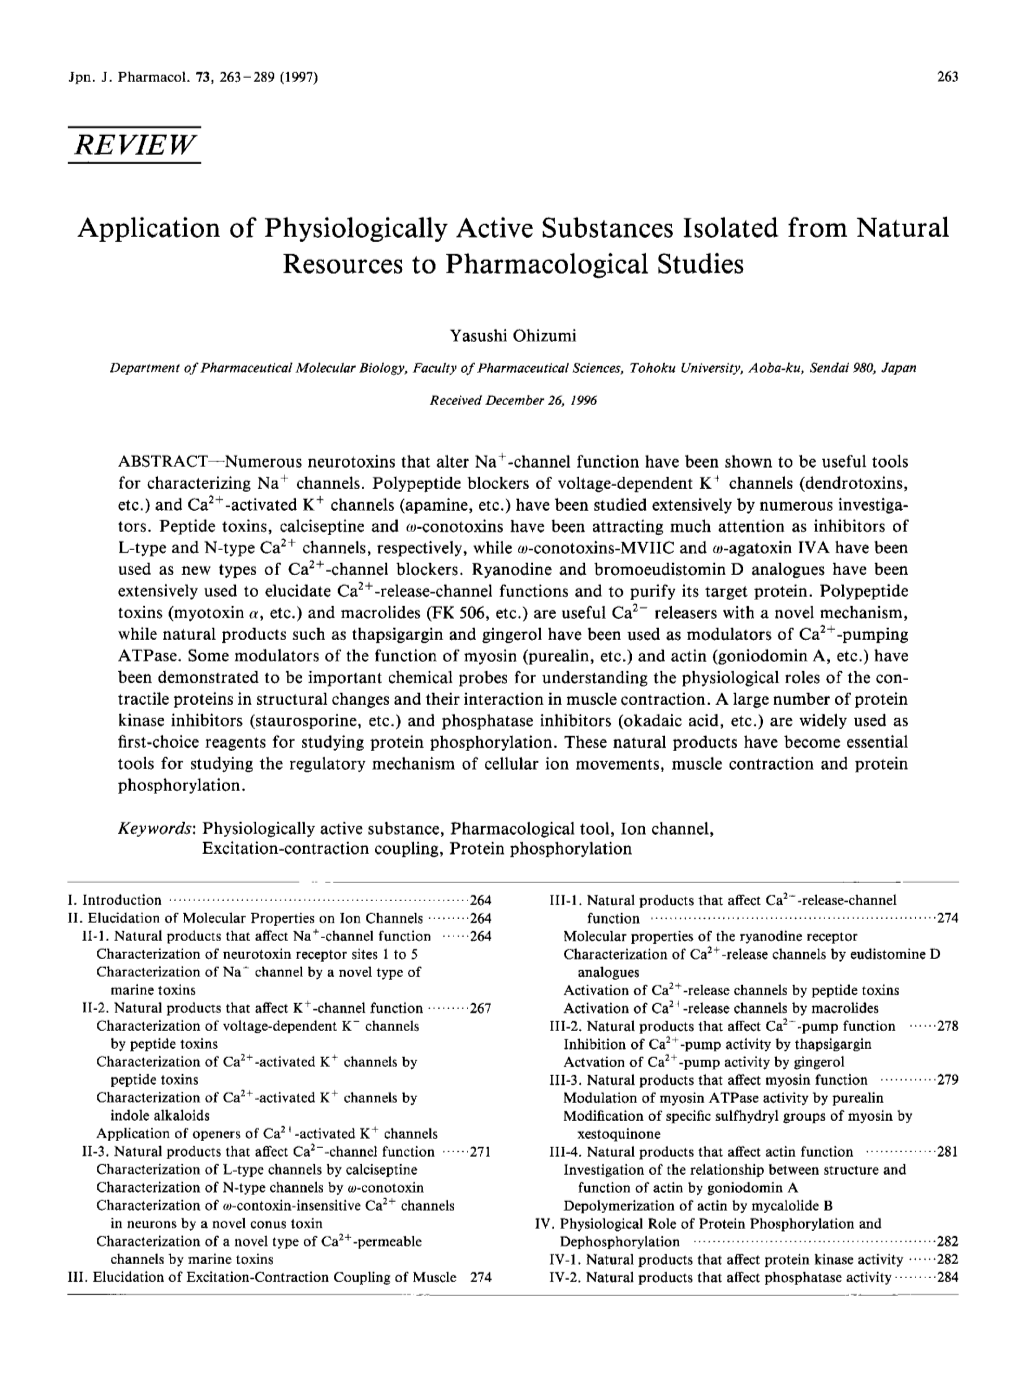 Application of Physiologically Active Substances Isolated from Natural Resources to Pharmacological Studies